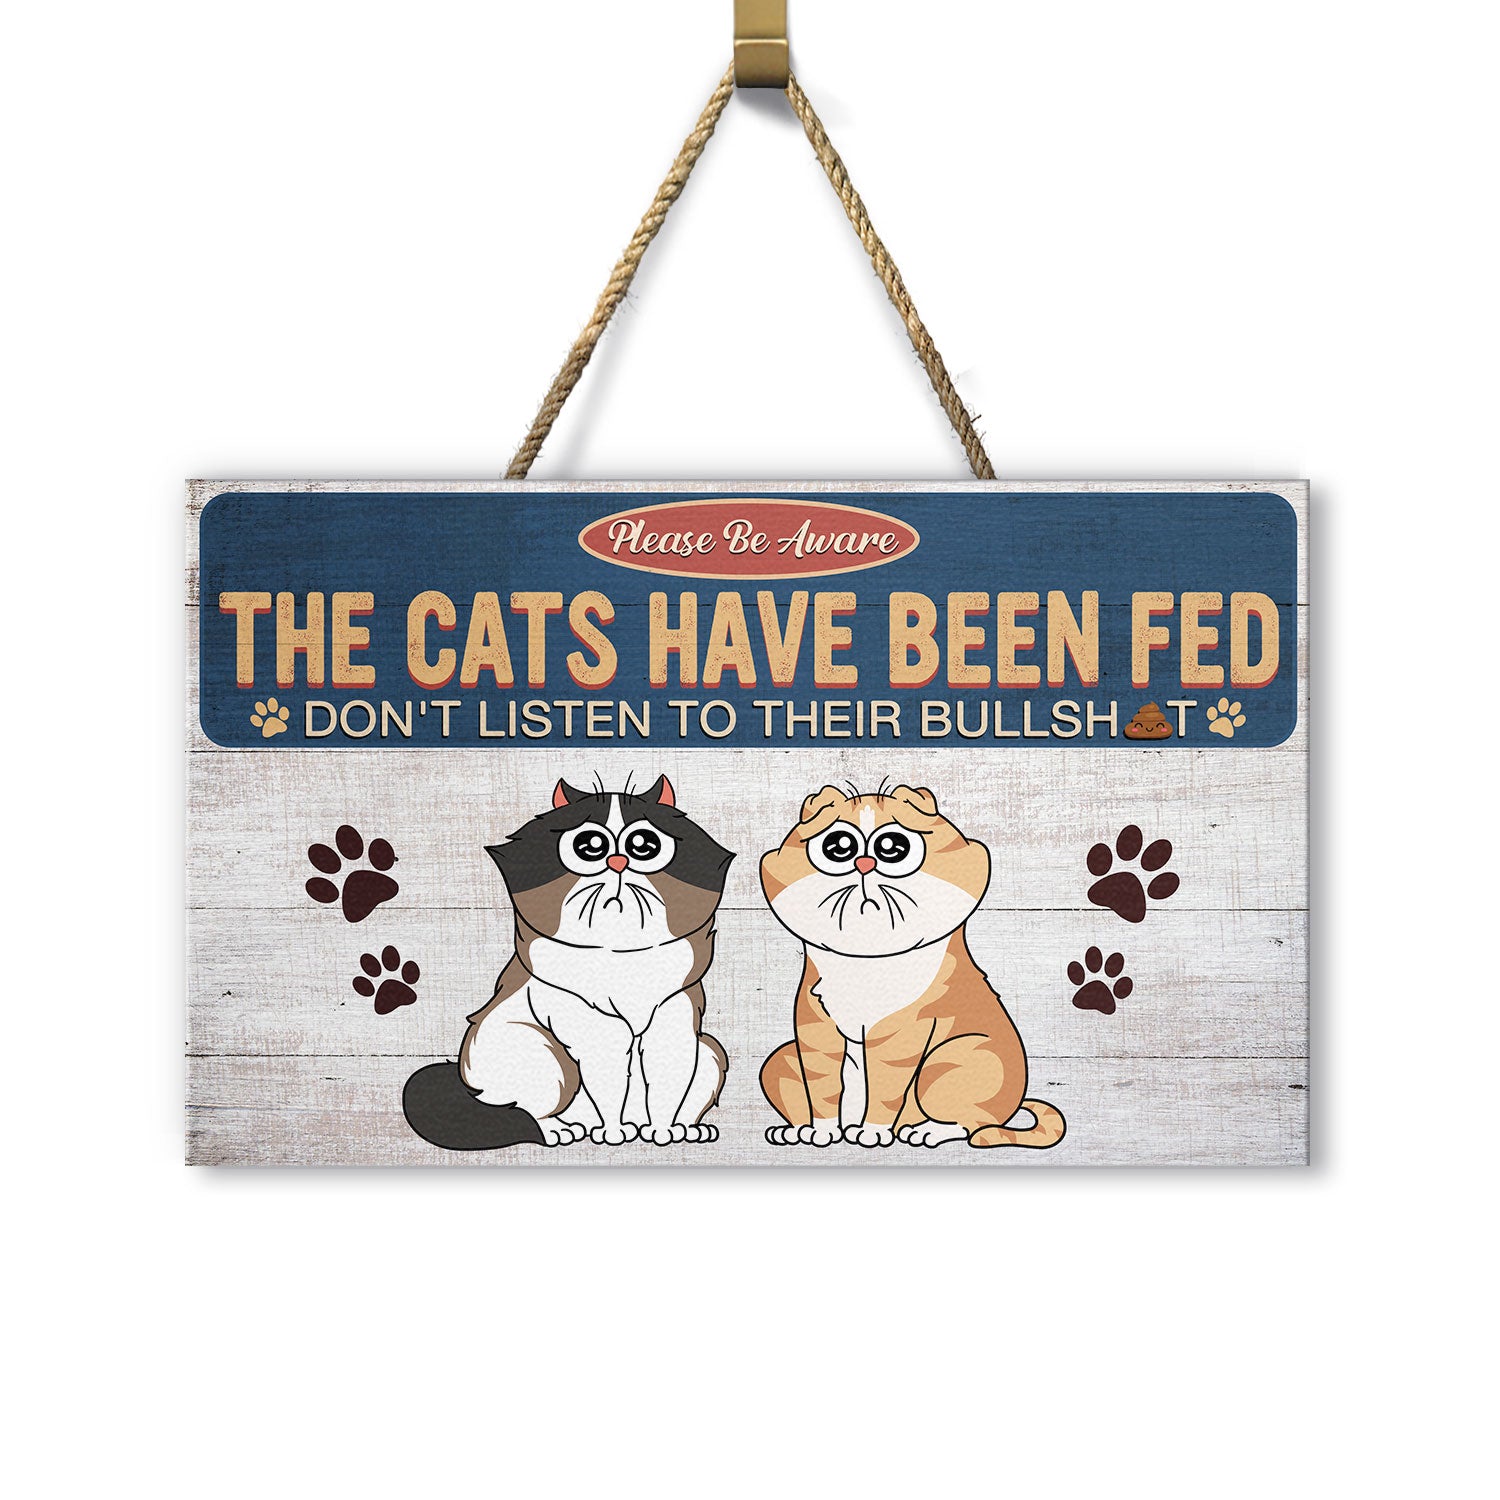 The Cats Have Been Fed - Home Decor, Funny Gift For Cat Lovers - Personalized Custom Shaped Wood Sign